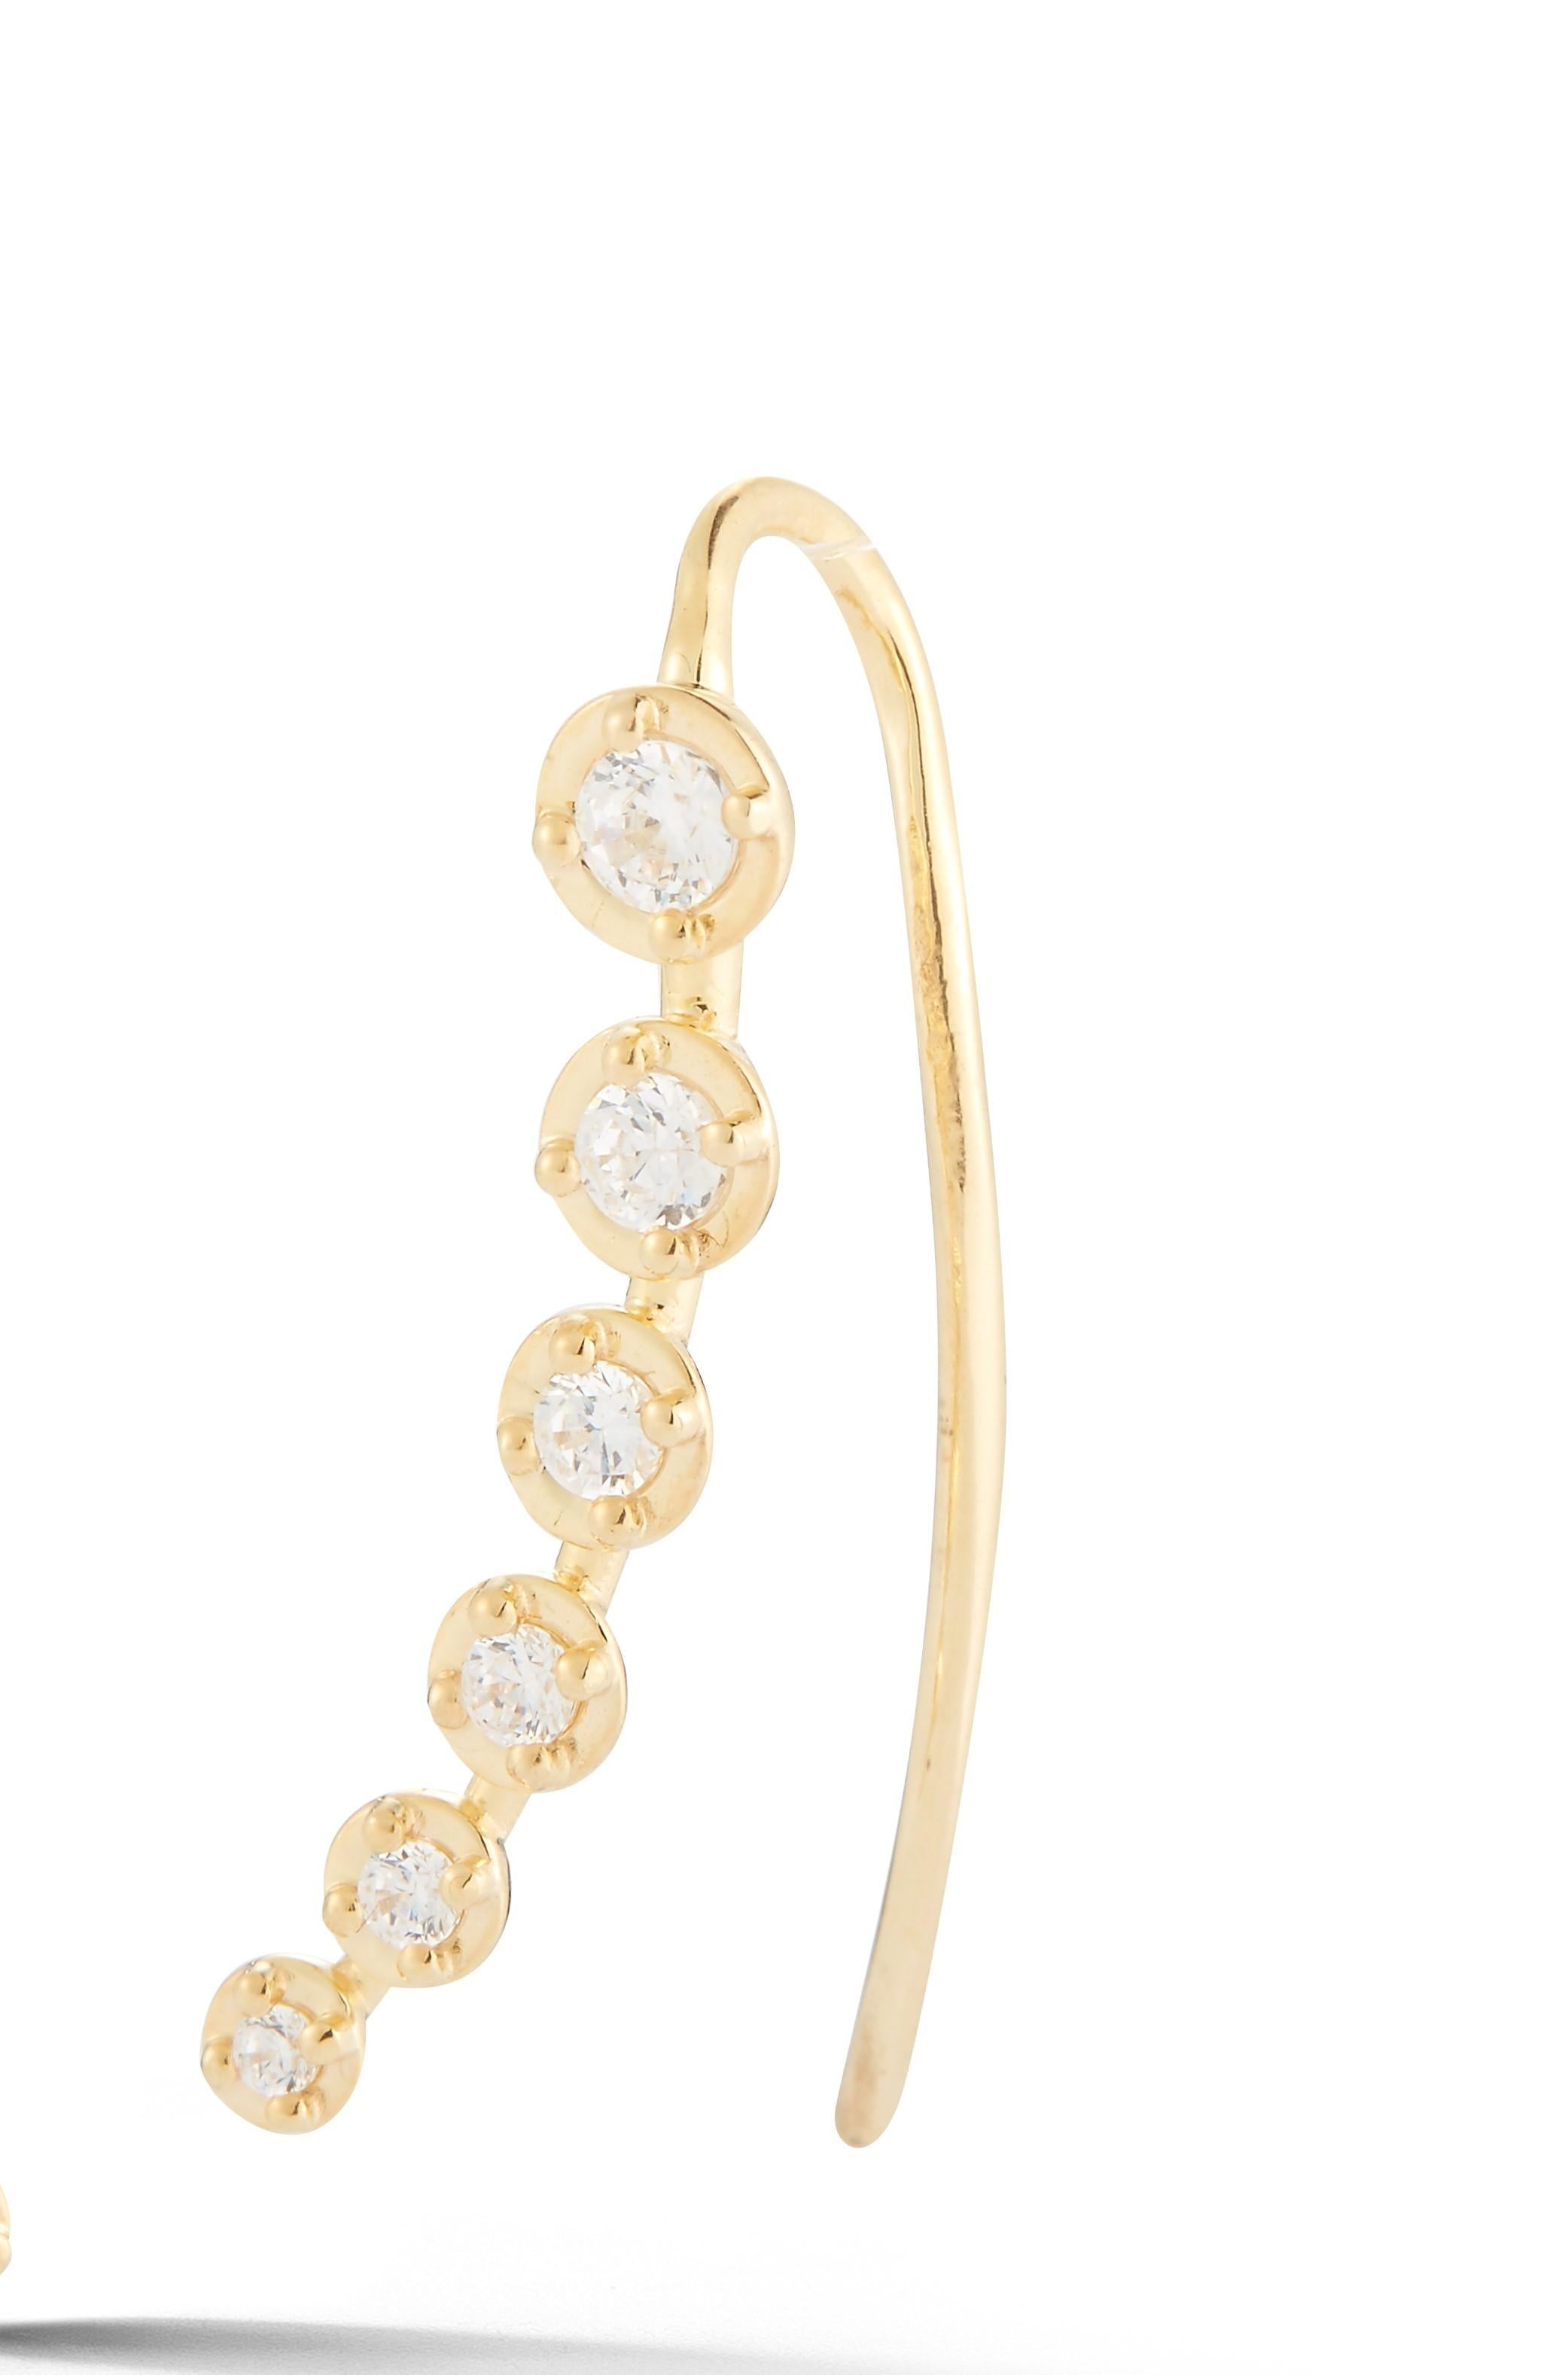 14 Karat Yellow Gold Hand-Crafted Polish-Finished Climber Earrings, Enhanced with 0.45 Carats of Graduating Diamond Bezels.
